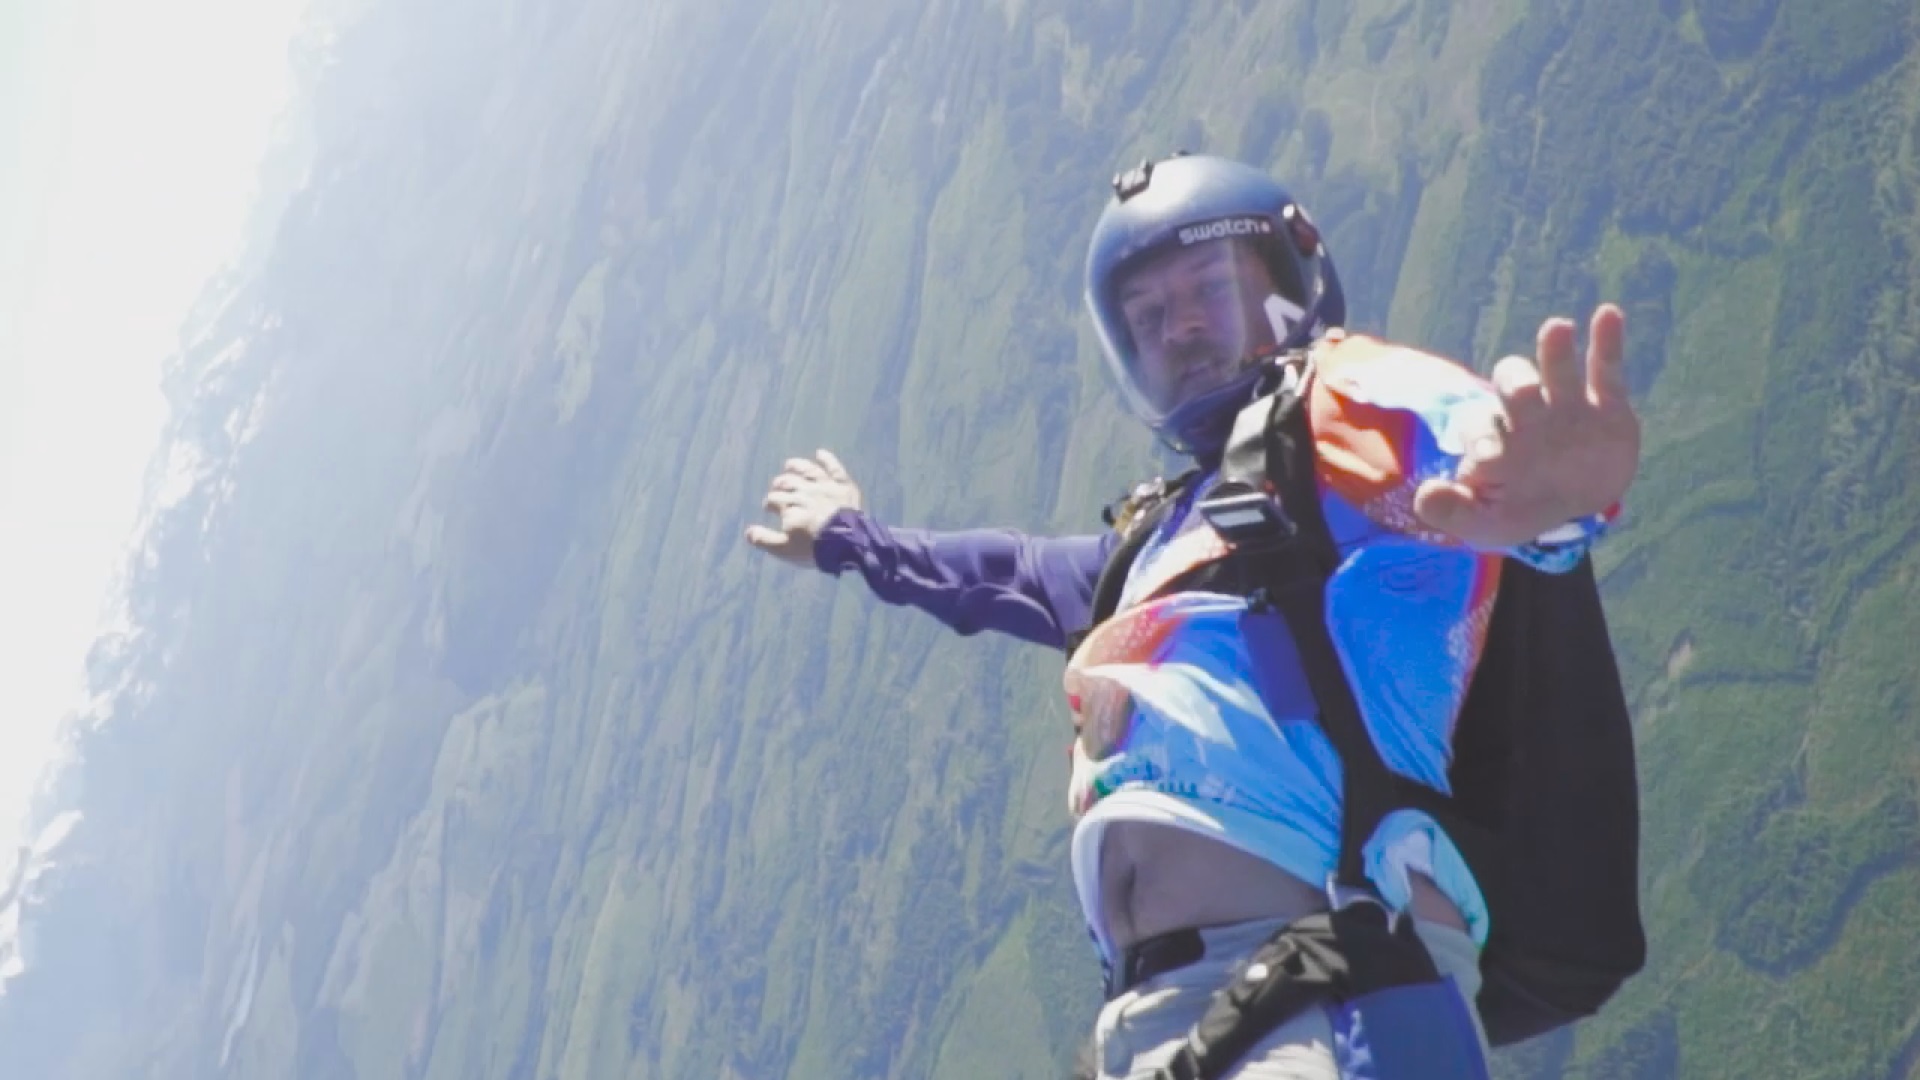 A skydiving accident left him a double amputee. Now he’s a snowboarding champion